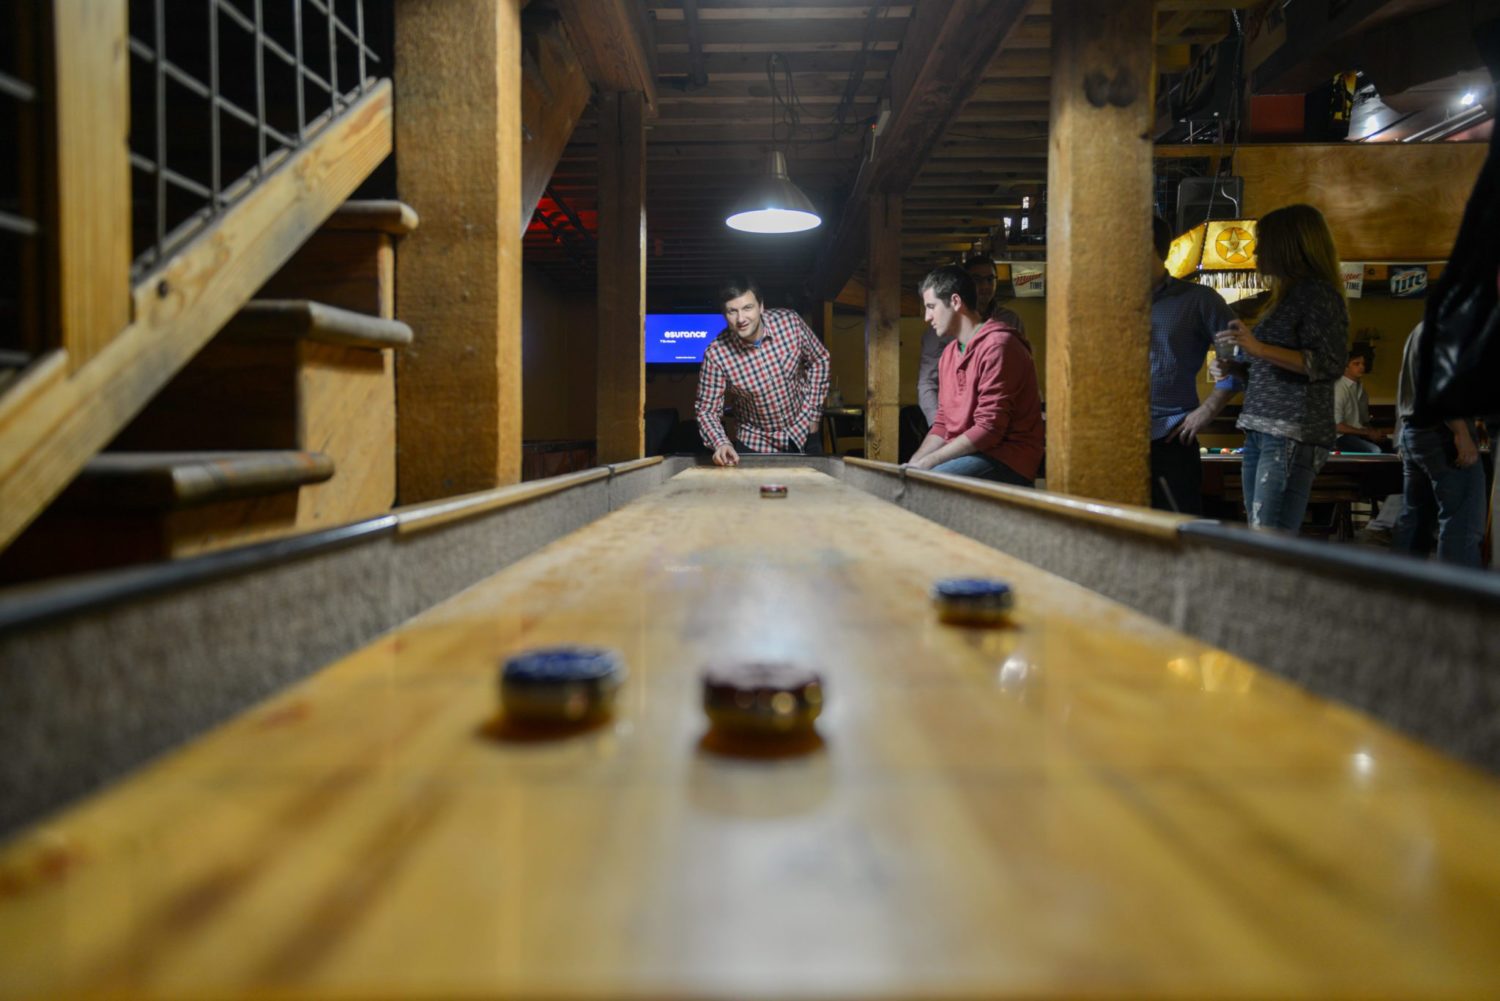 Curious to learn how to play shuffleboard? Check out www.GameOnFamily.com for shuffleboard rules for this classic game room game. Game on!